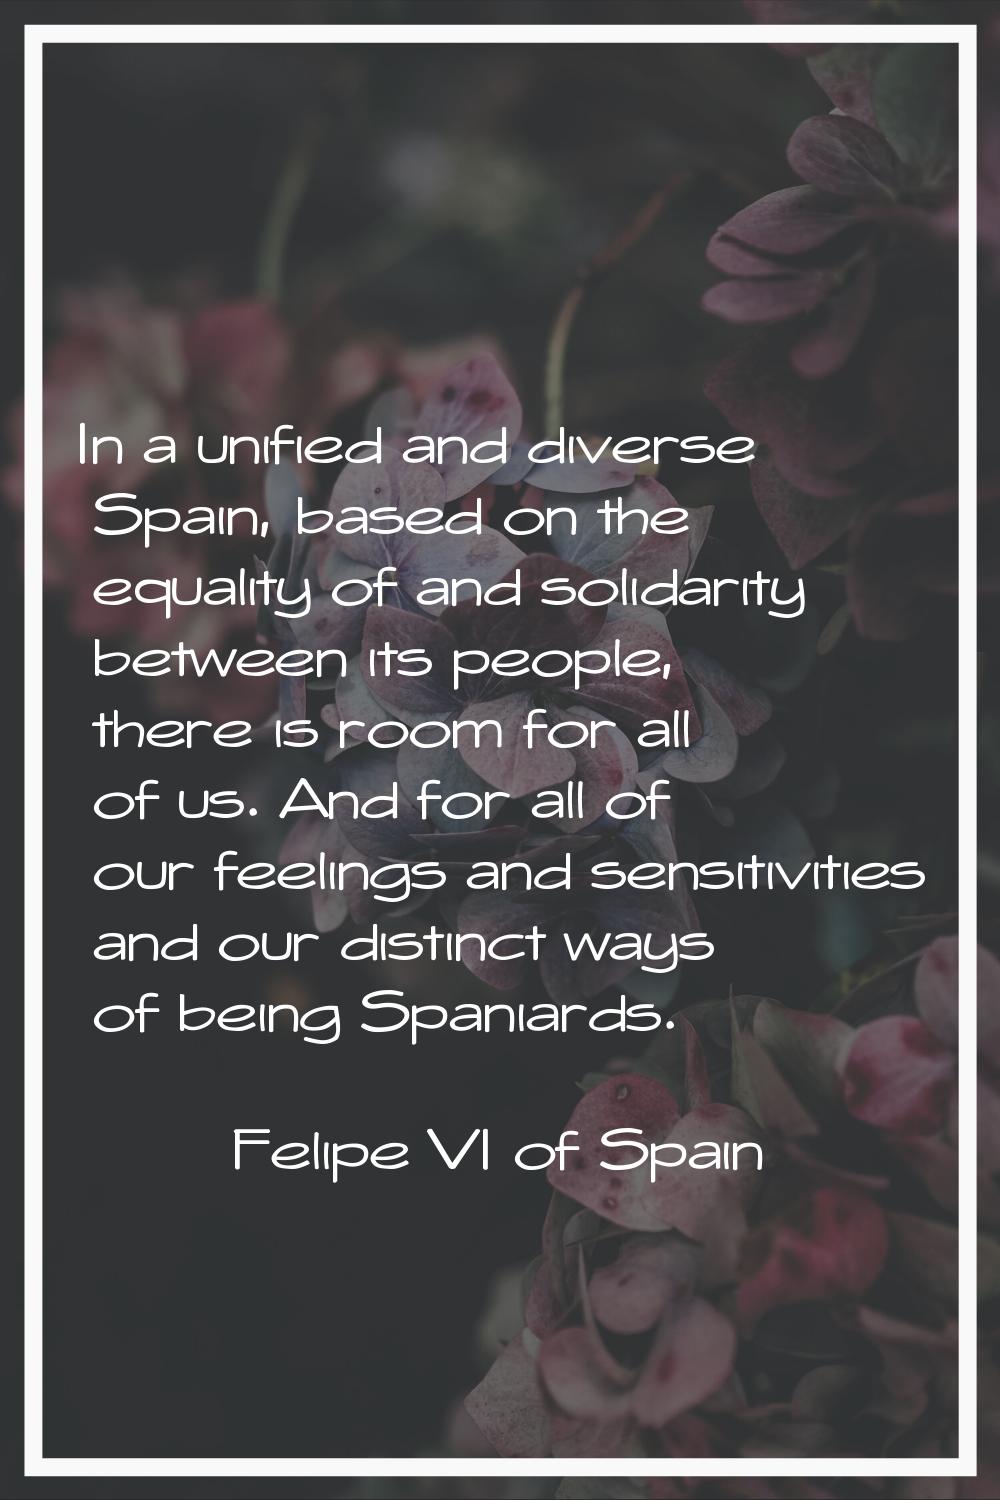 In a unified and diverse Spain, based on the equality of and solidarity between its people, there i